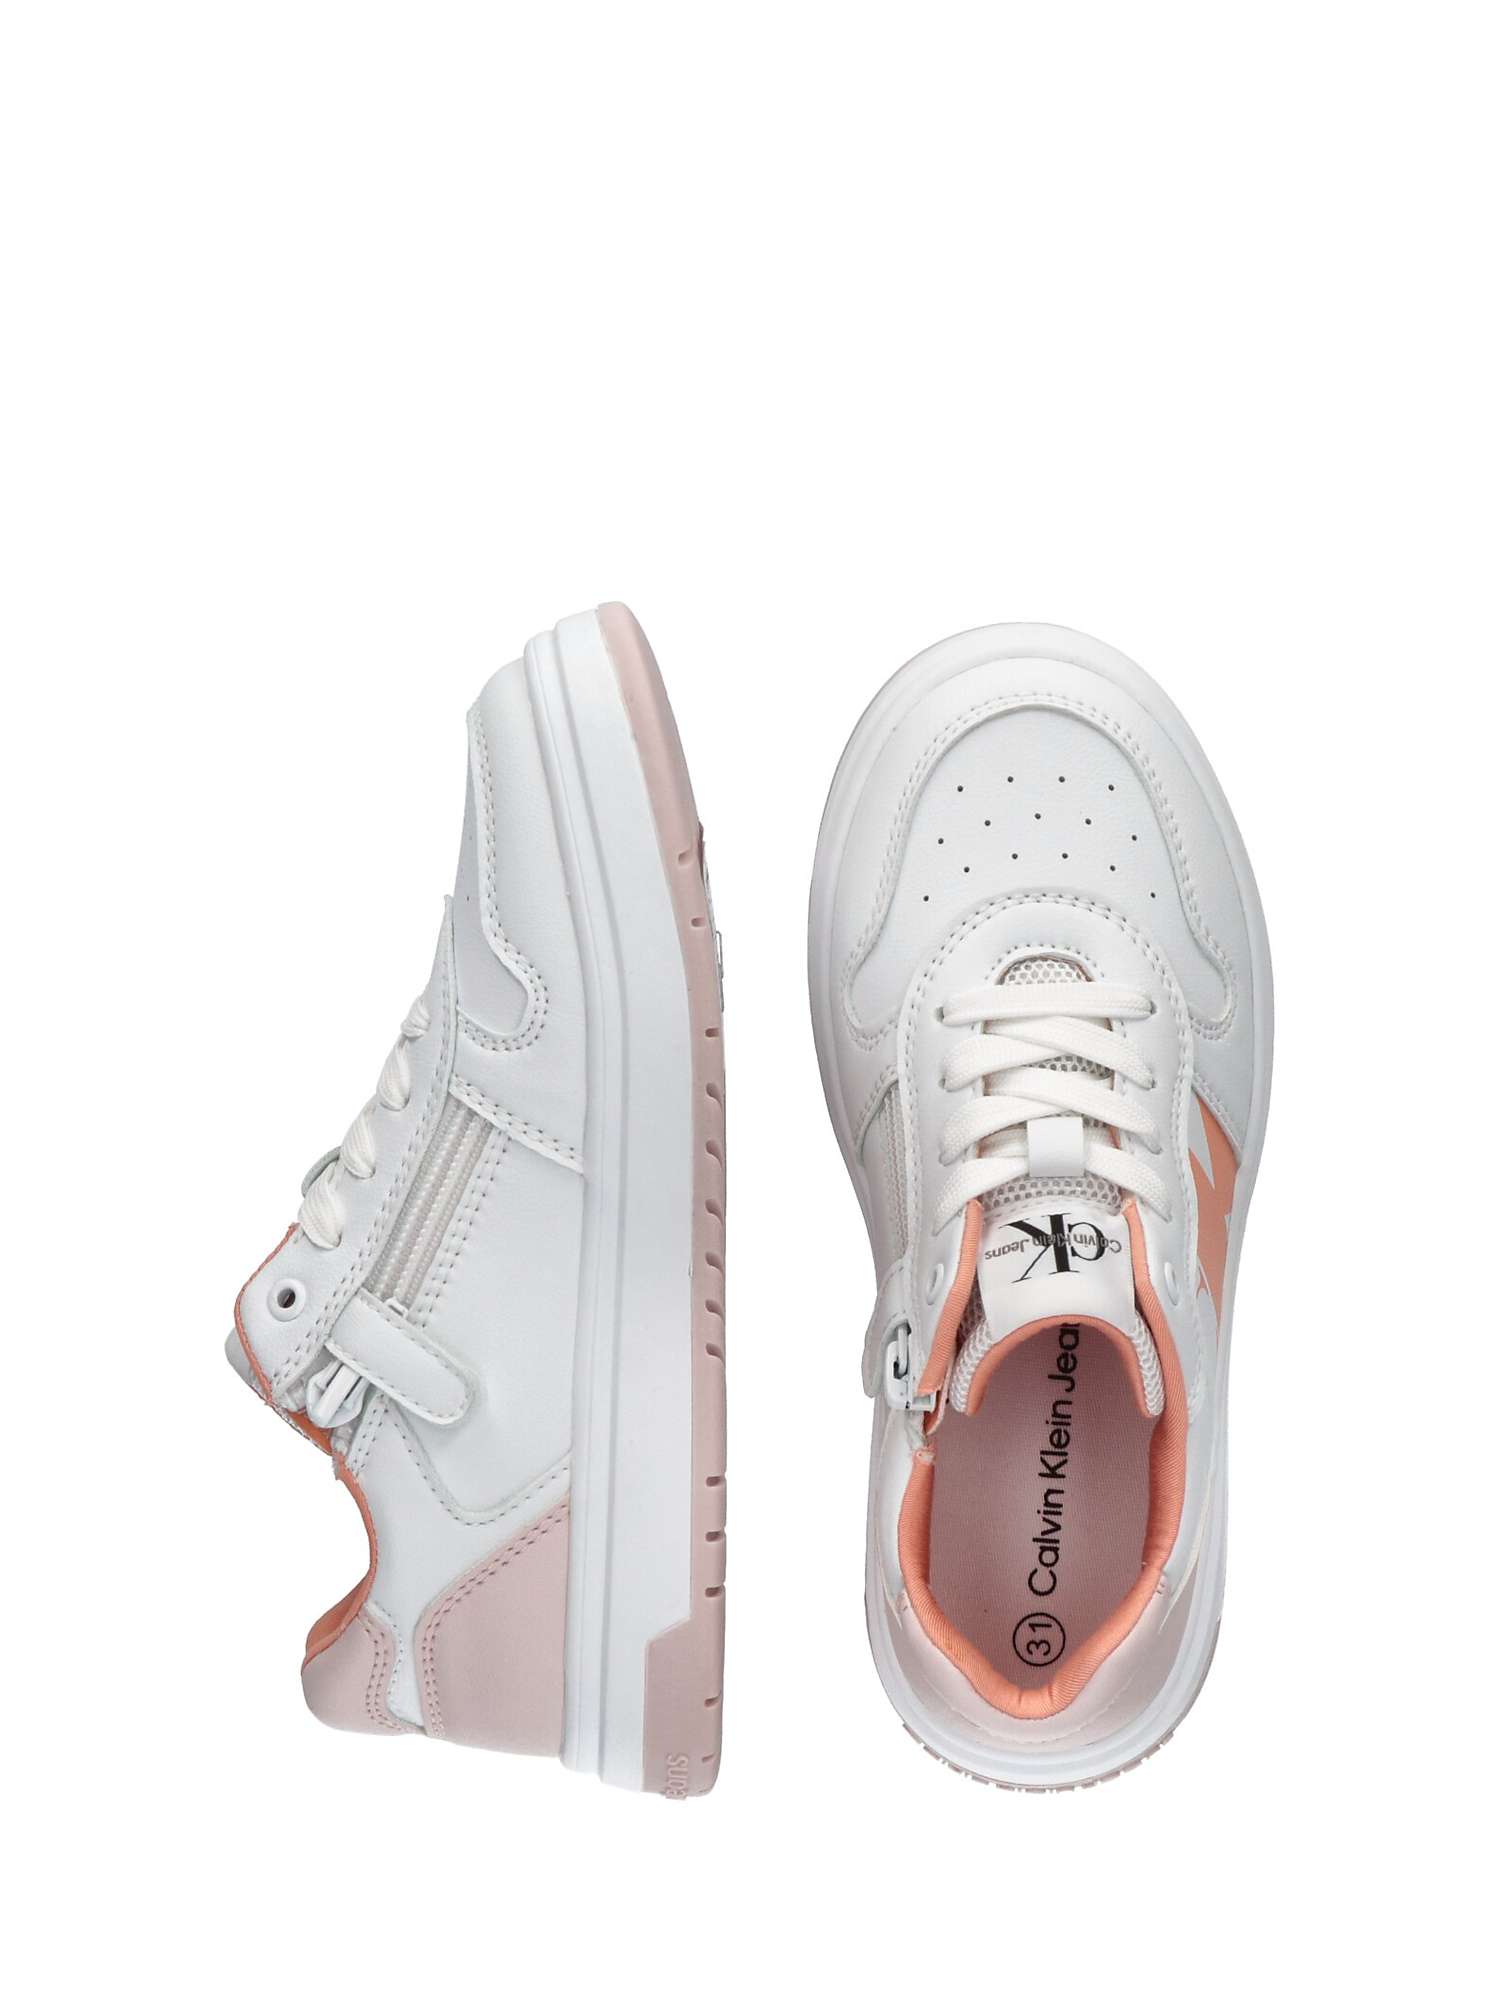 Buy Calvin Klein Kids' Monogram Logo Low Cut Lace Up Trainers, White/Pink Online at johnlewis.com